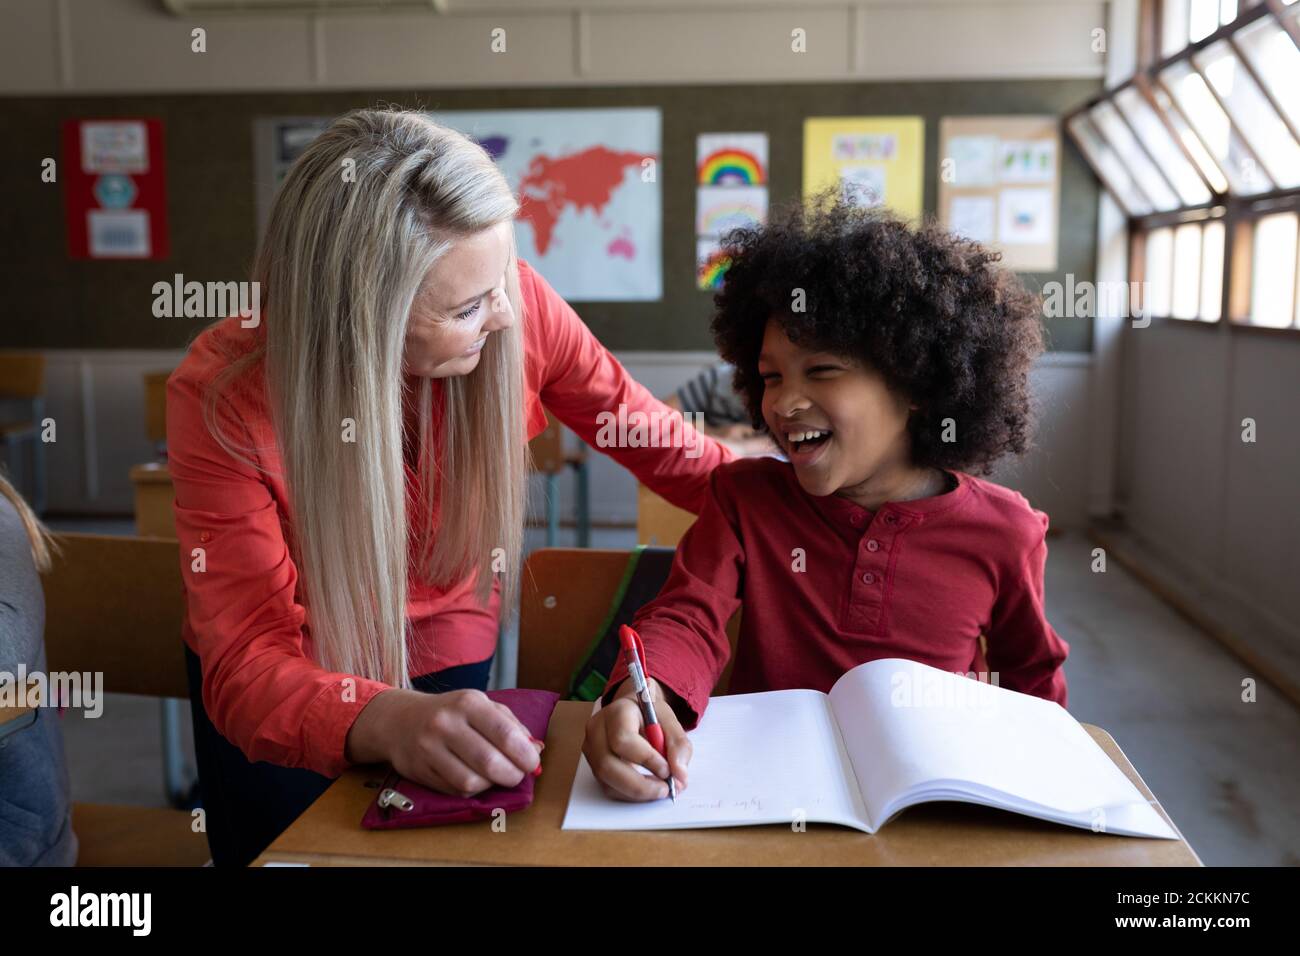 Female teacher helping a boy to write in a book in class at school Stock Photo